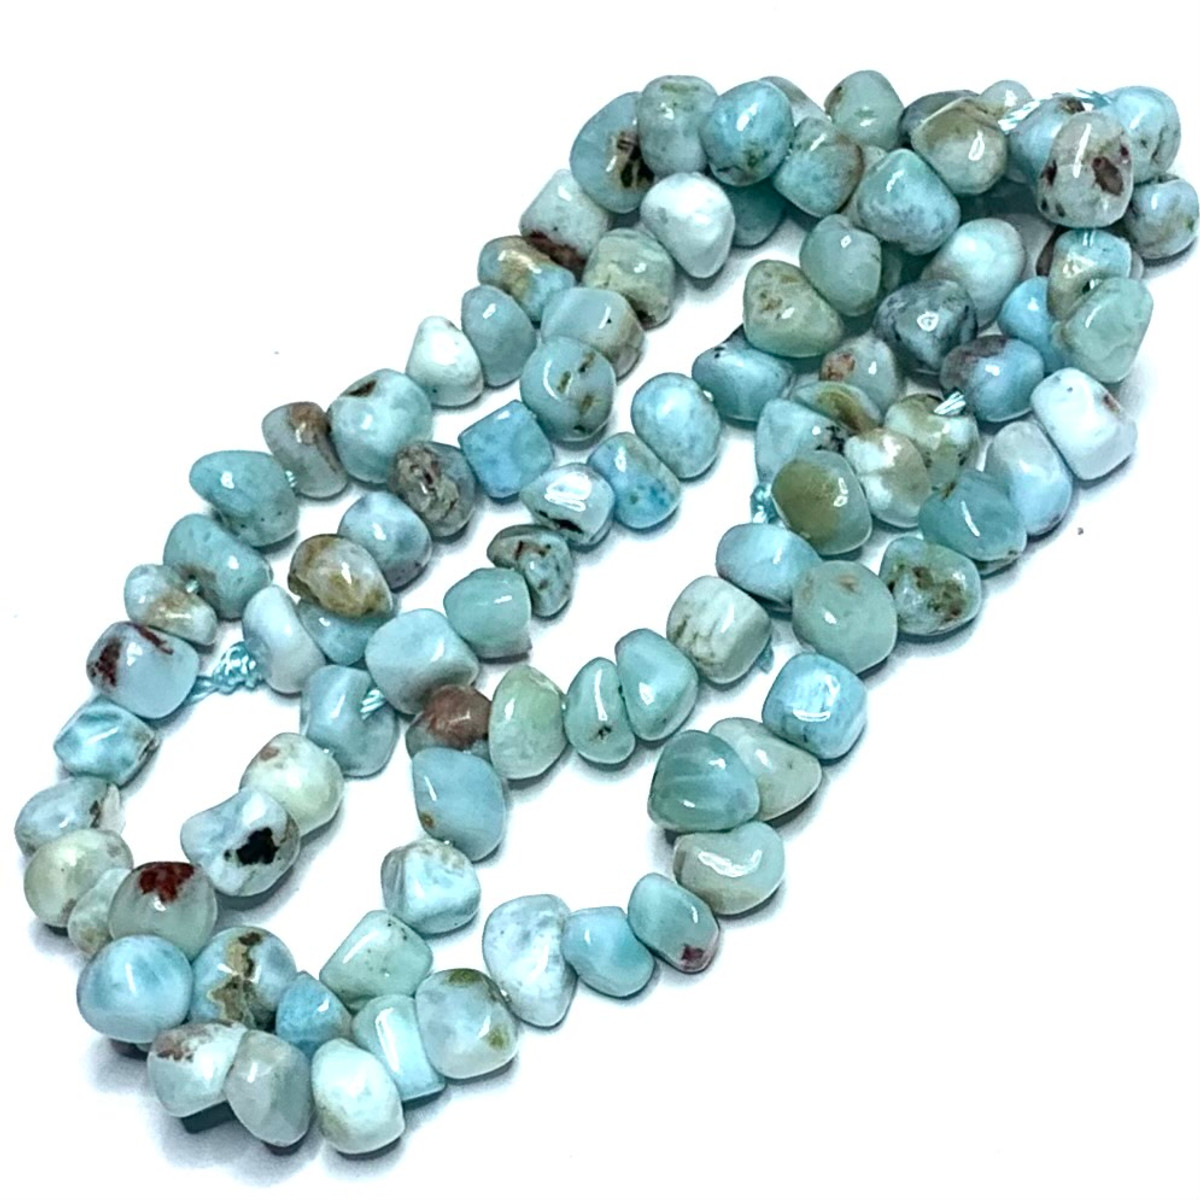 Larimar Tumbled and Polished Nugget Beads-5-8mm (SP3754)
